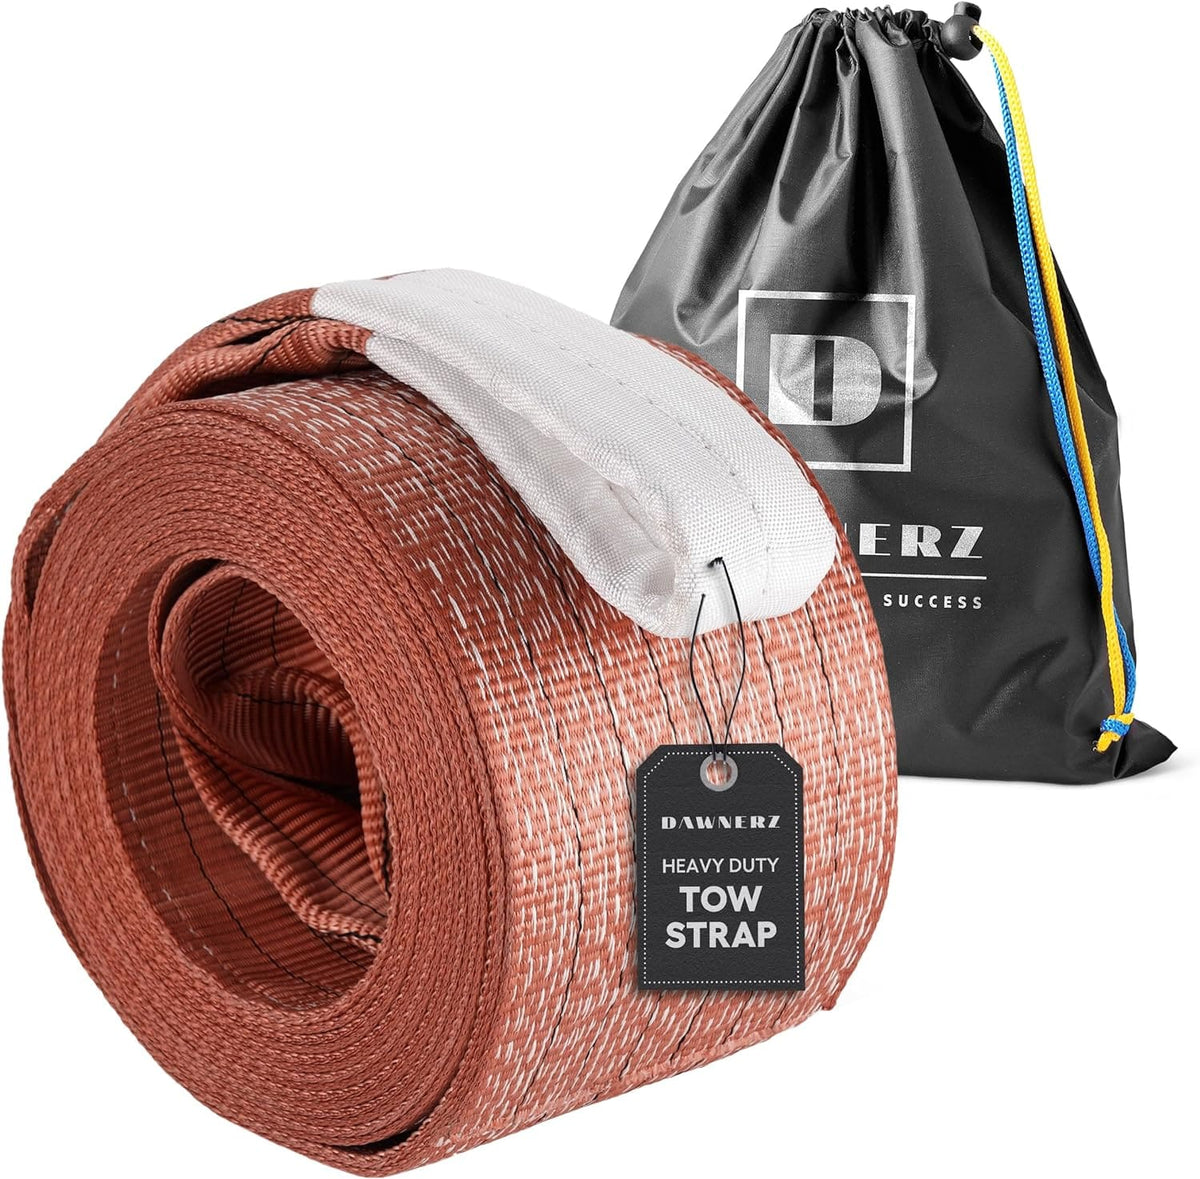 Heavy Duty Tow Strap for Tractors | MBS 110000 lb 20ft - Dawnerz Tow Straps